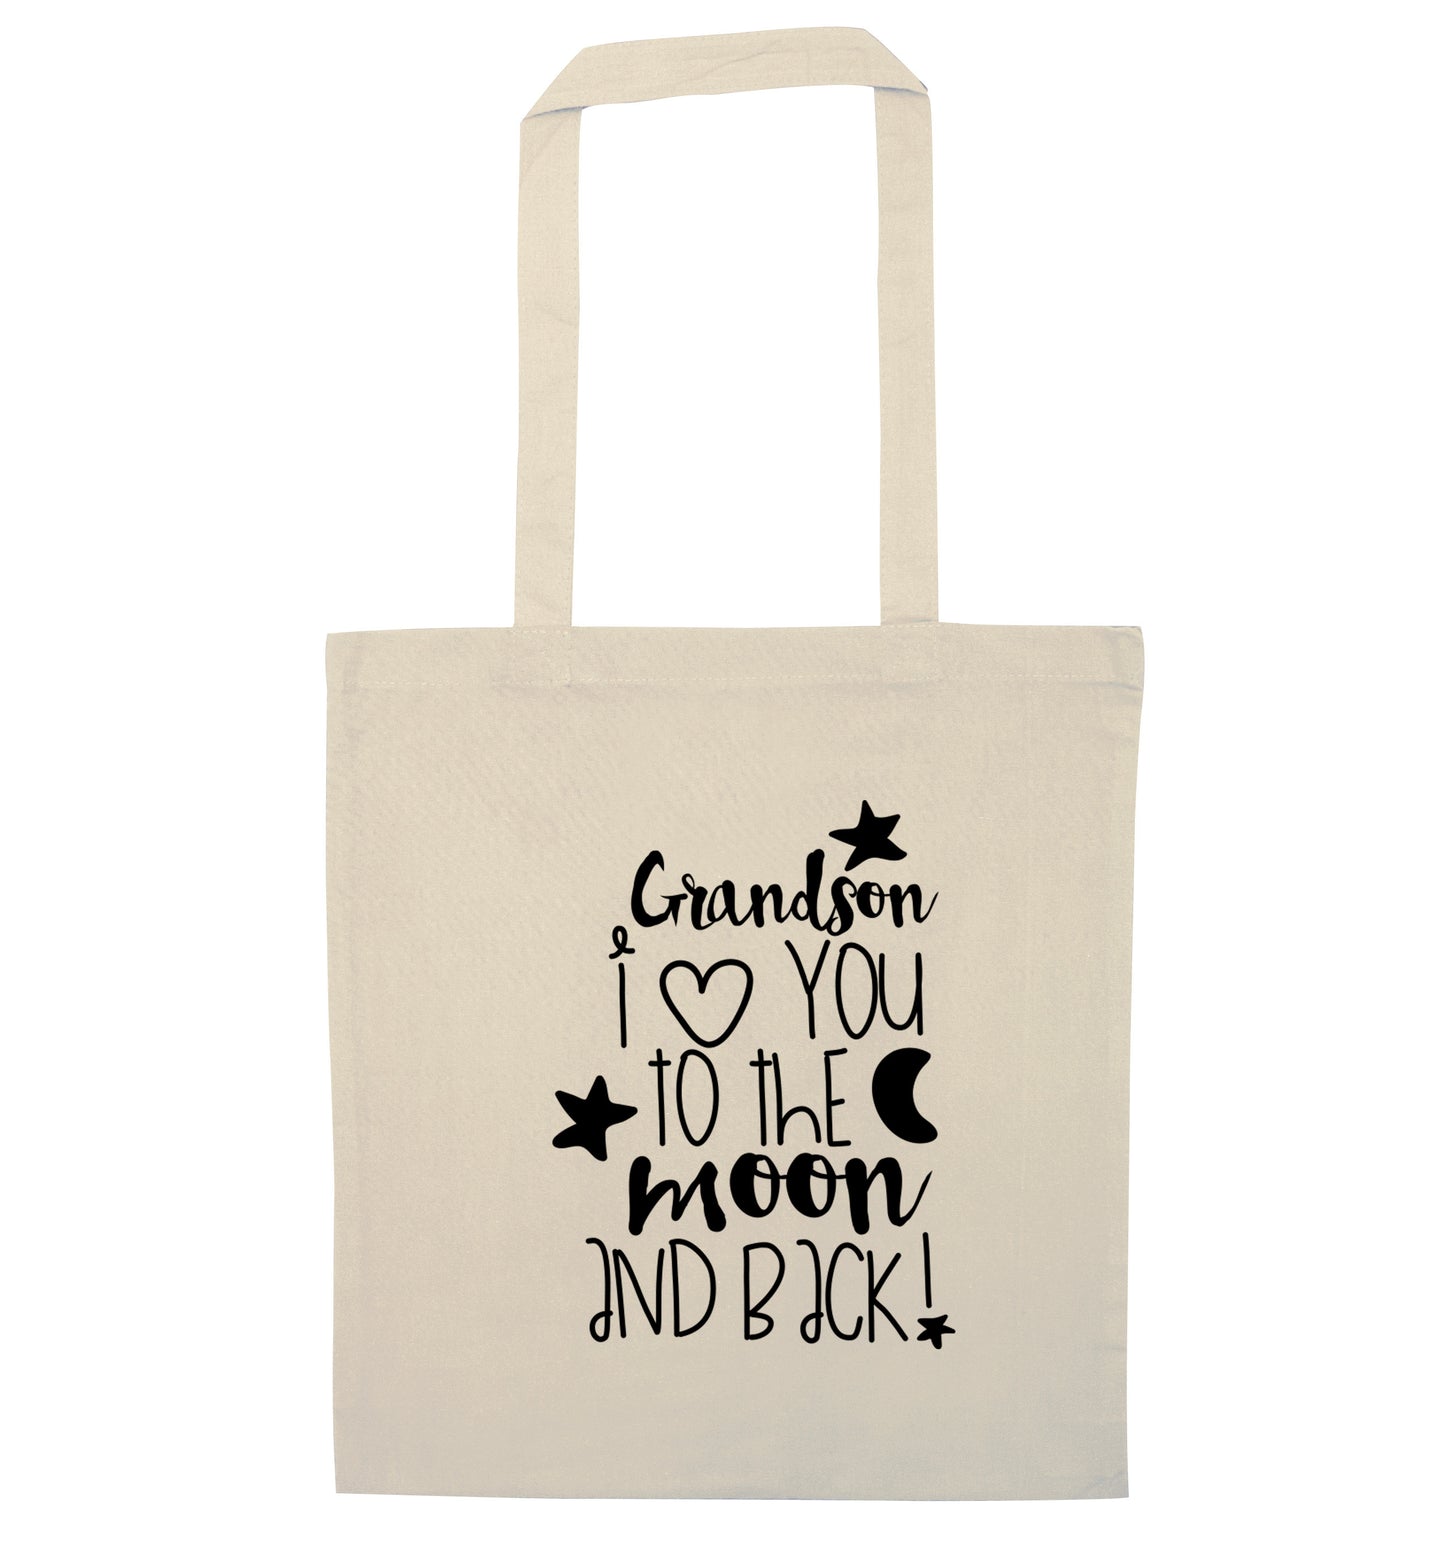 Grandson I love you to the moon and back natural tote bag